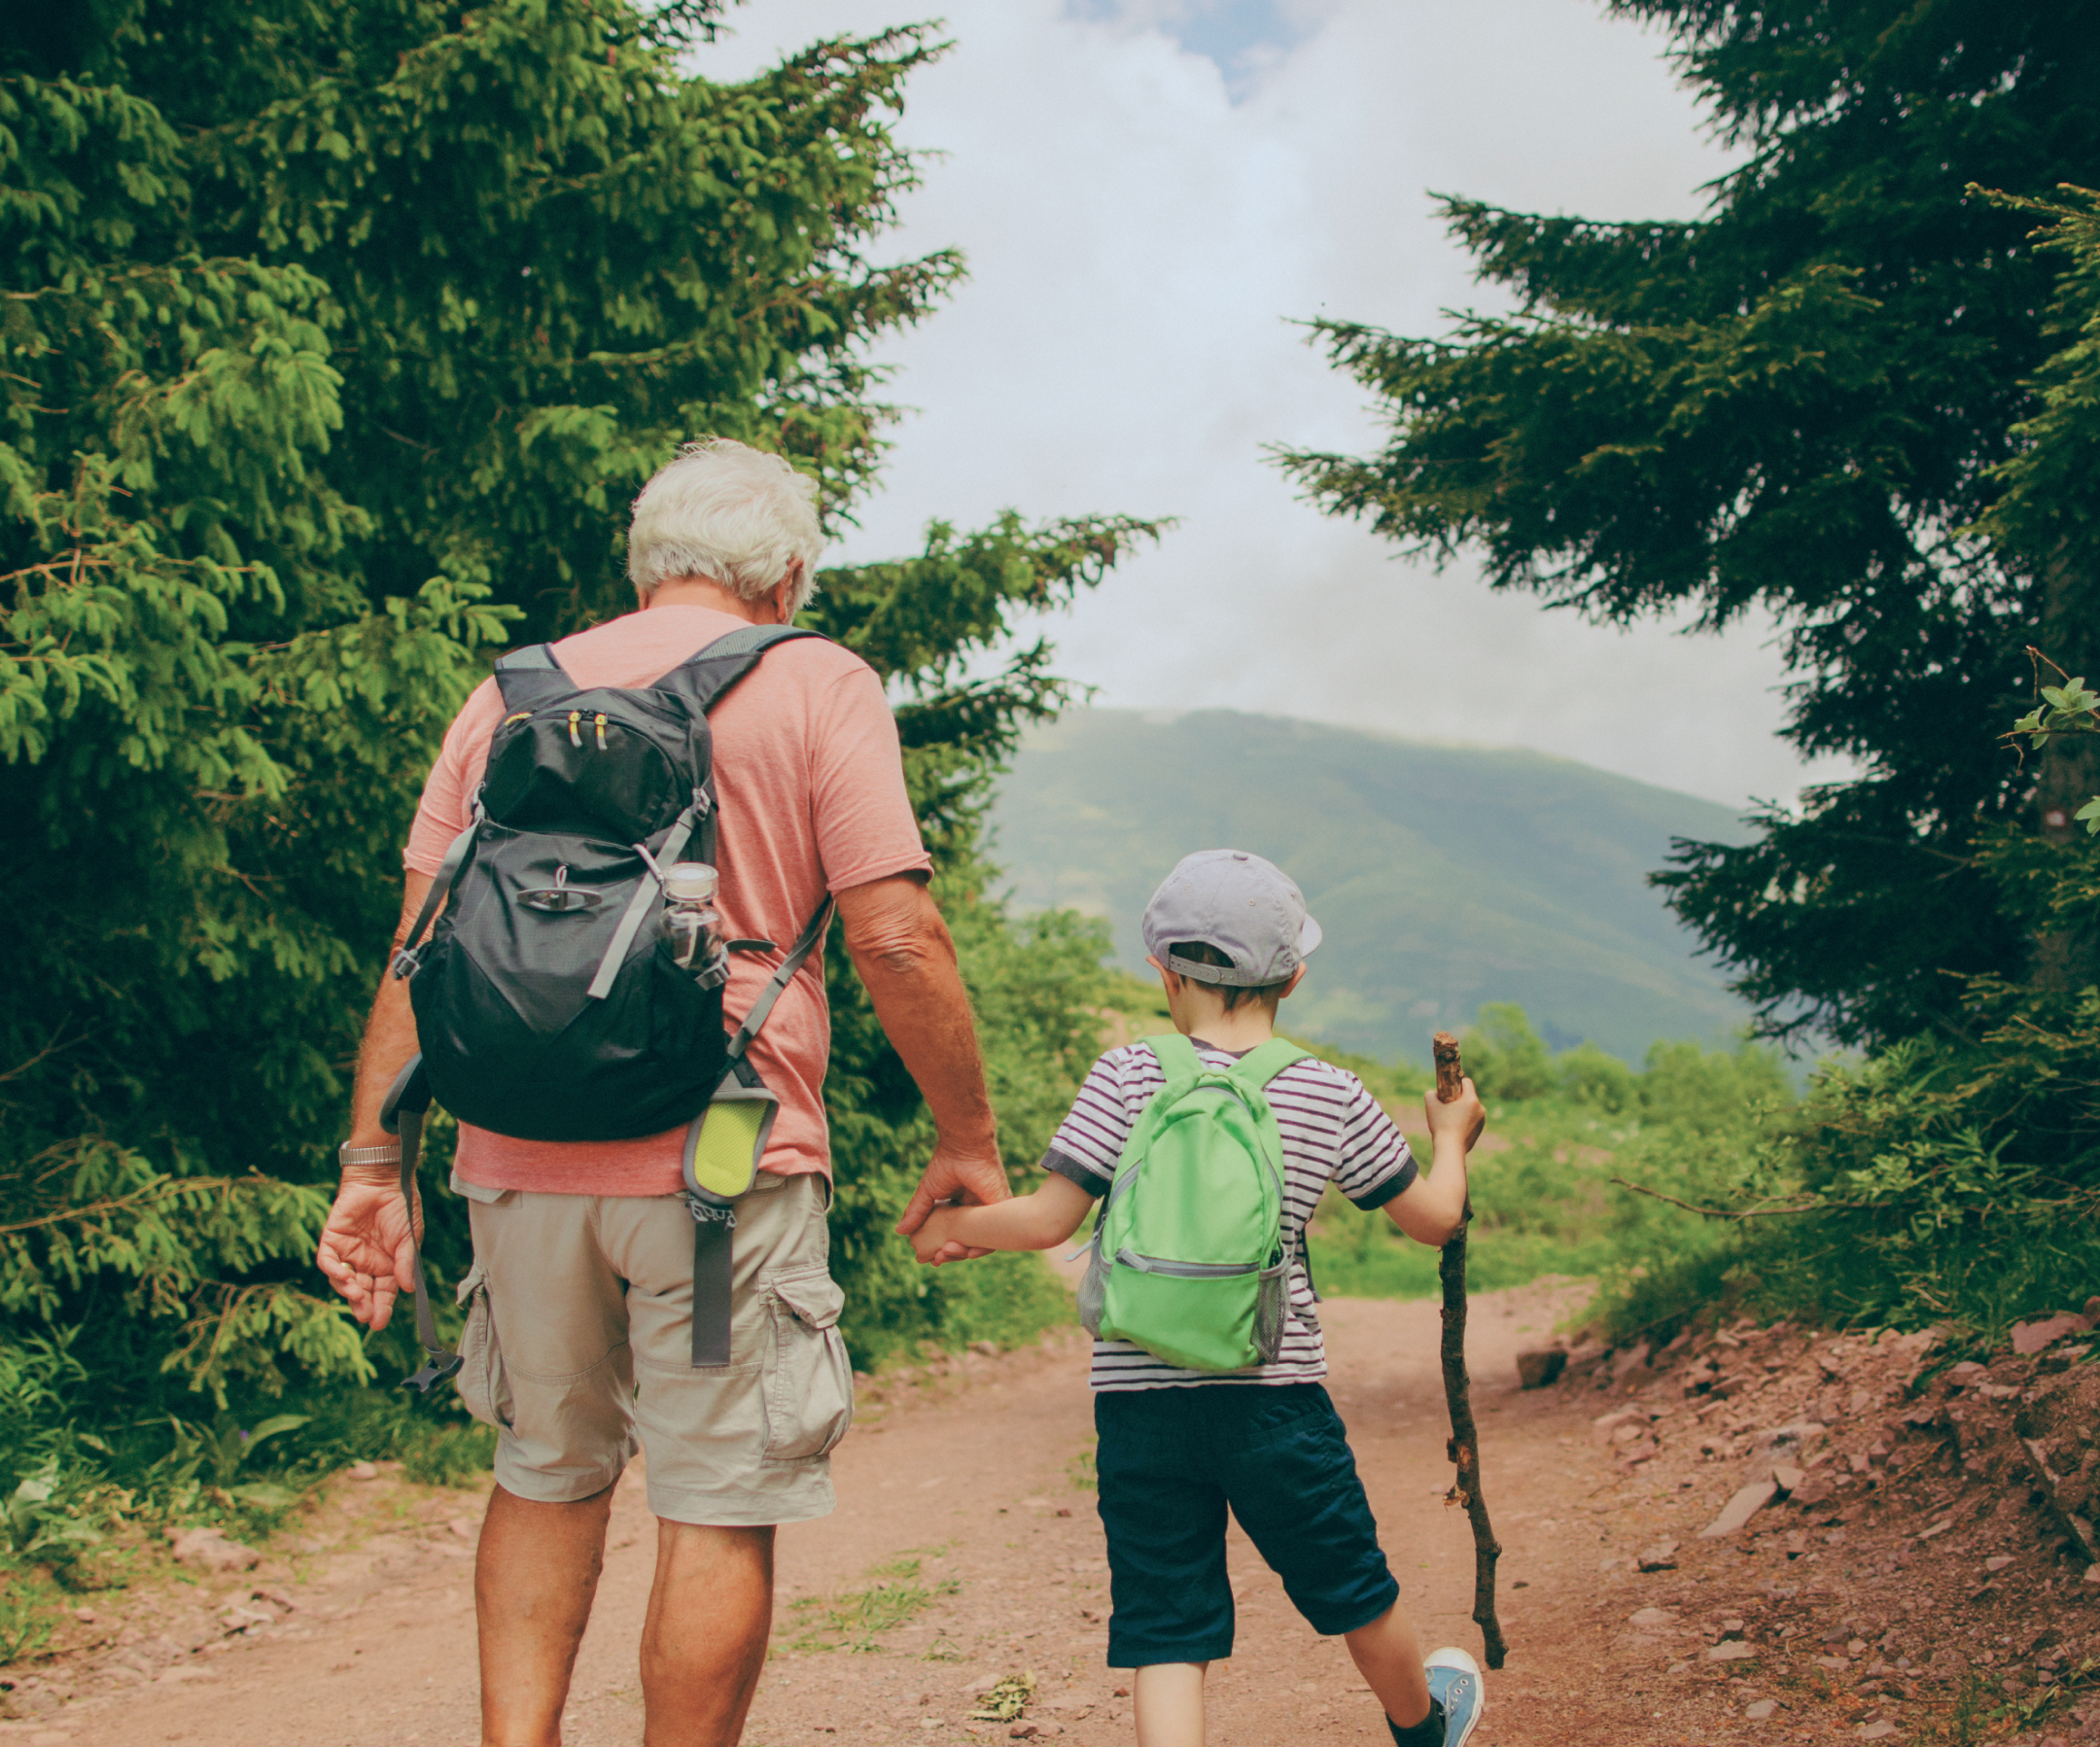 Older man hiking with child in woods.